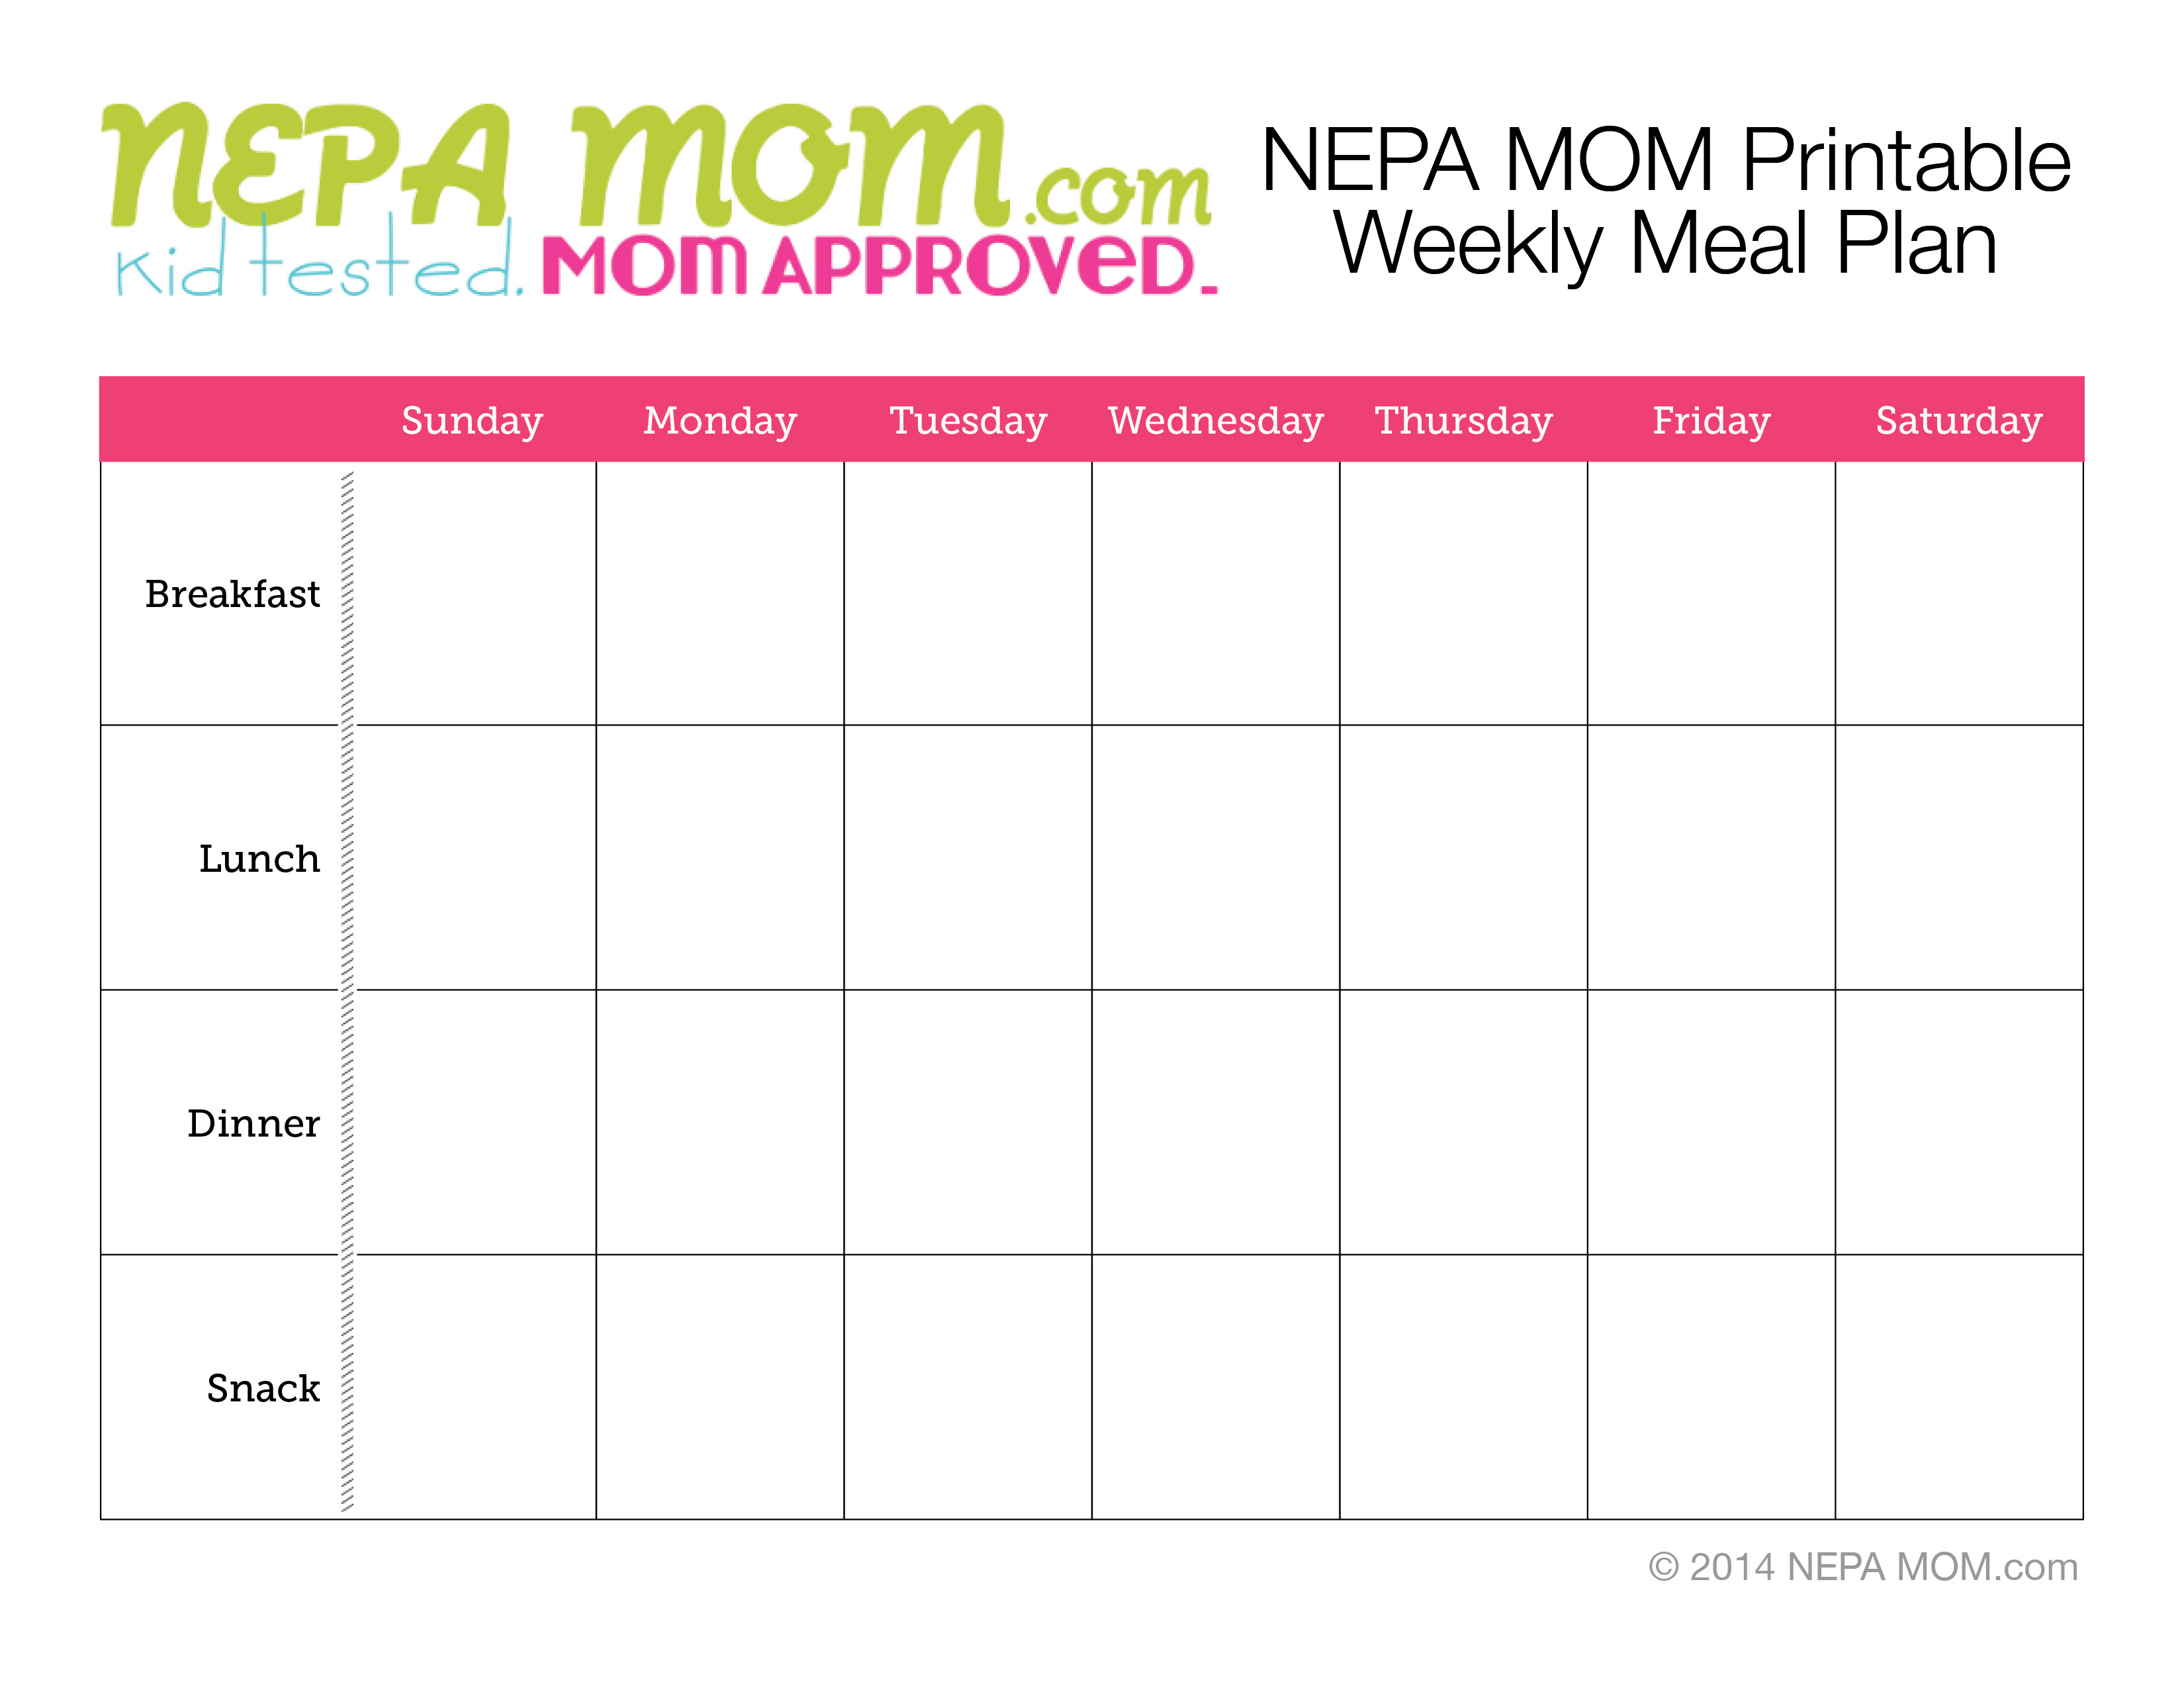 The NEPA MOM meal planning worksheet will help you plan your meals for the trie week, allowing you to save money and time in the kitchen!